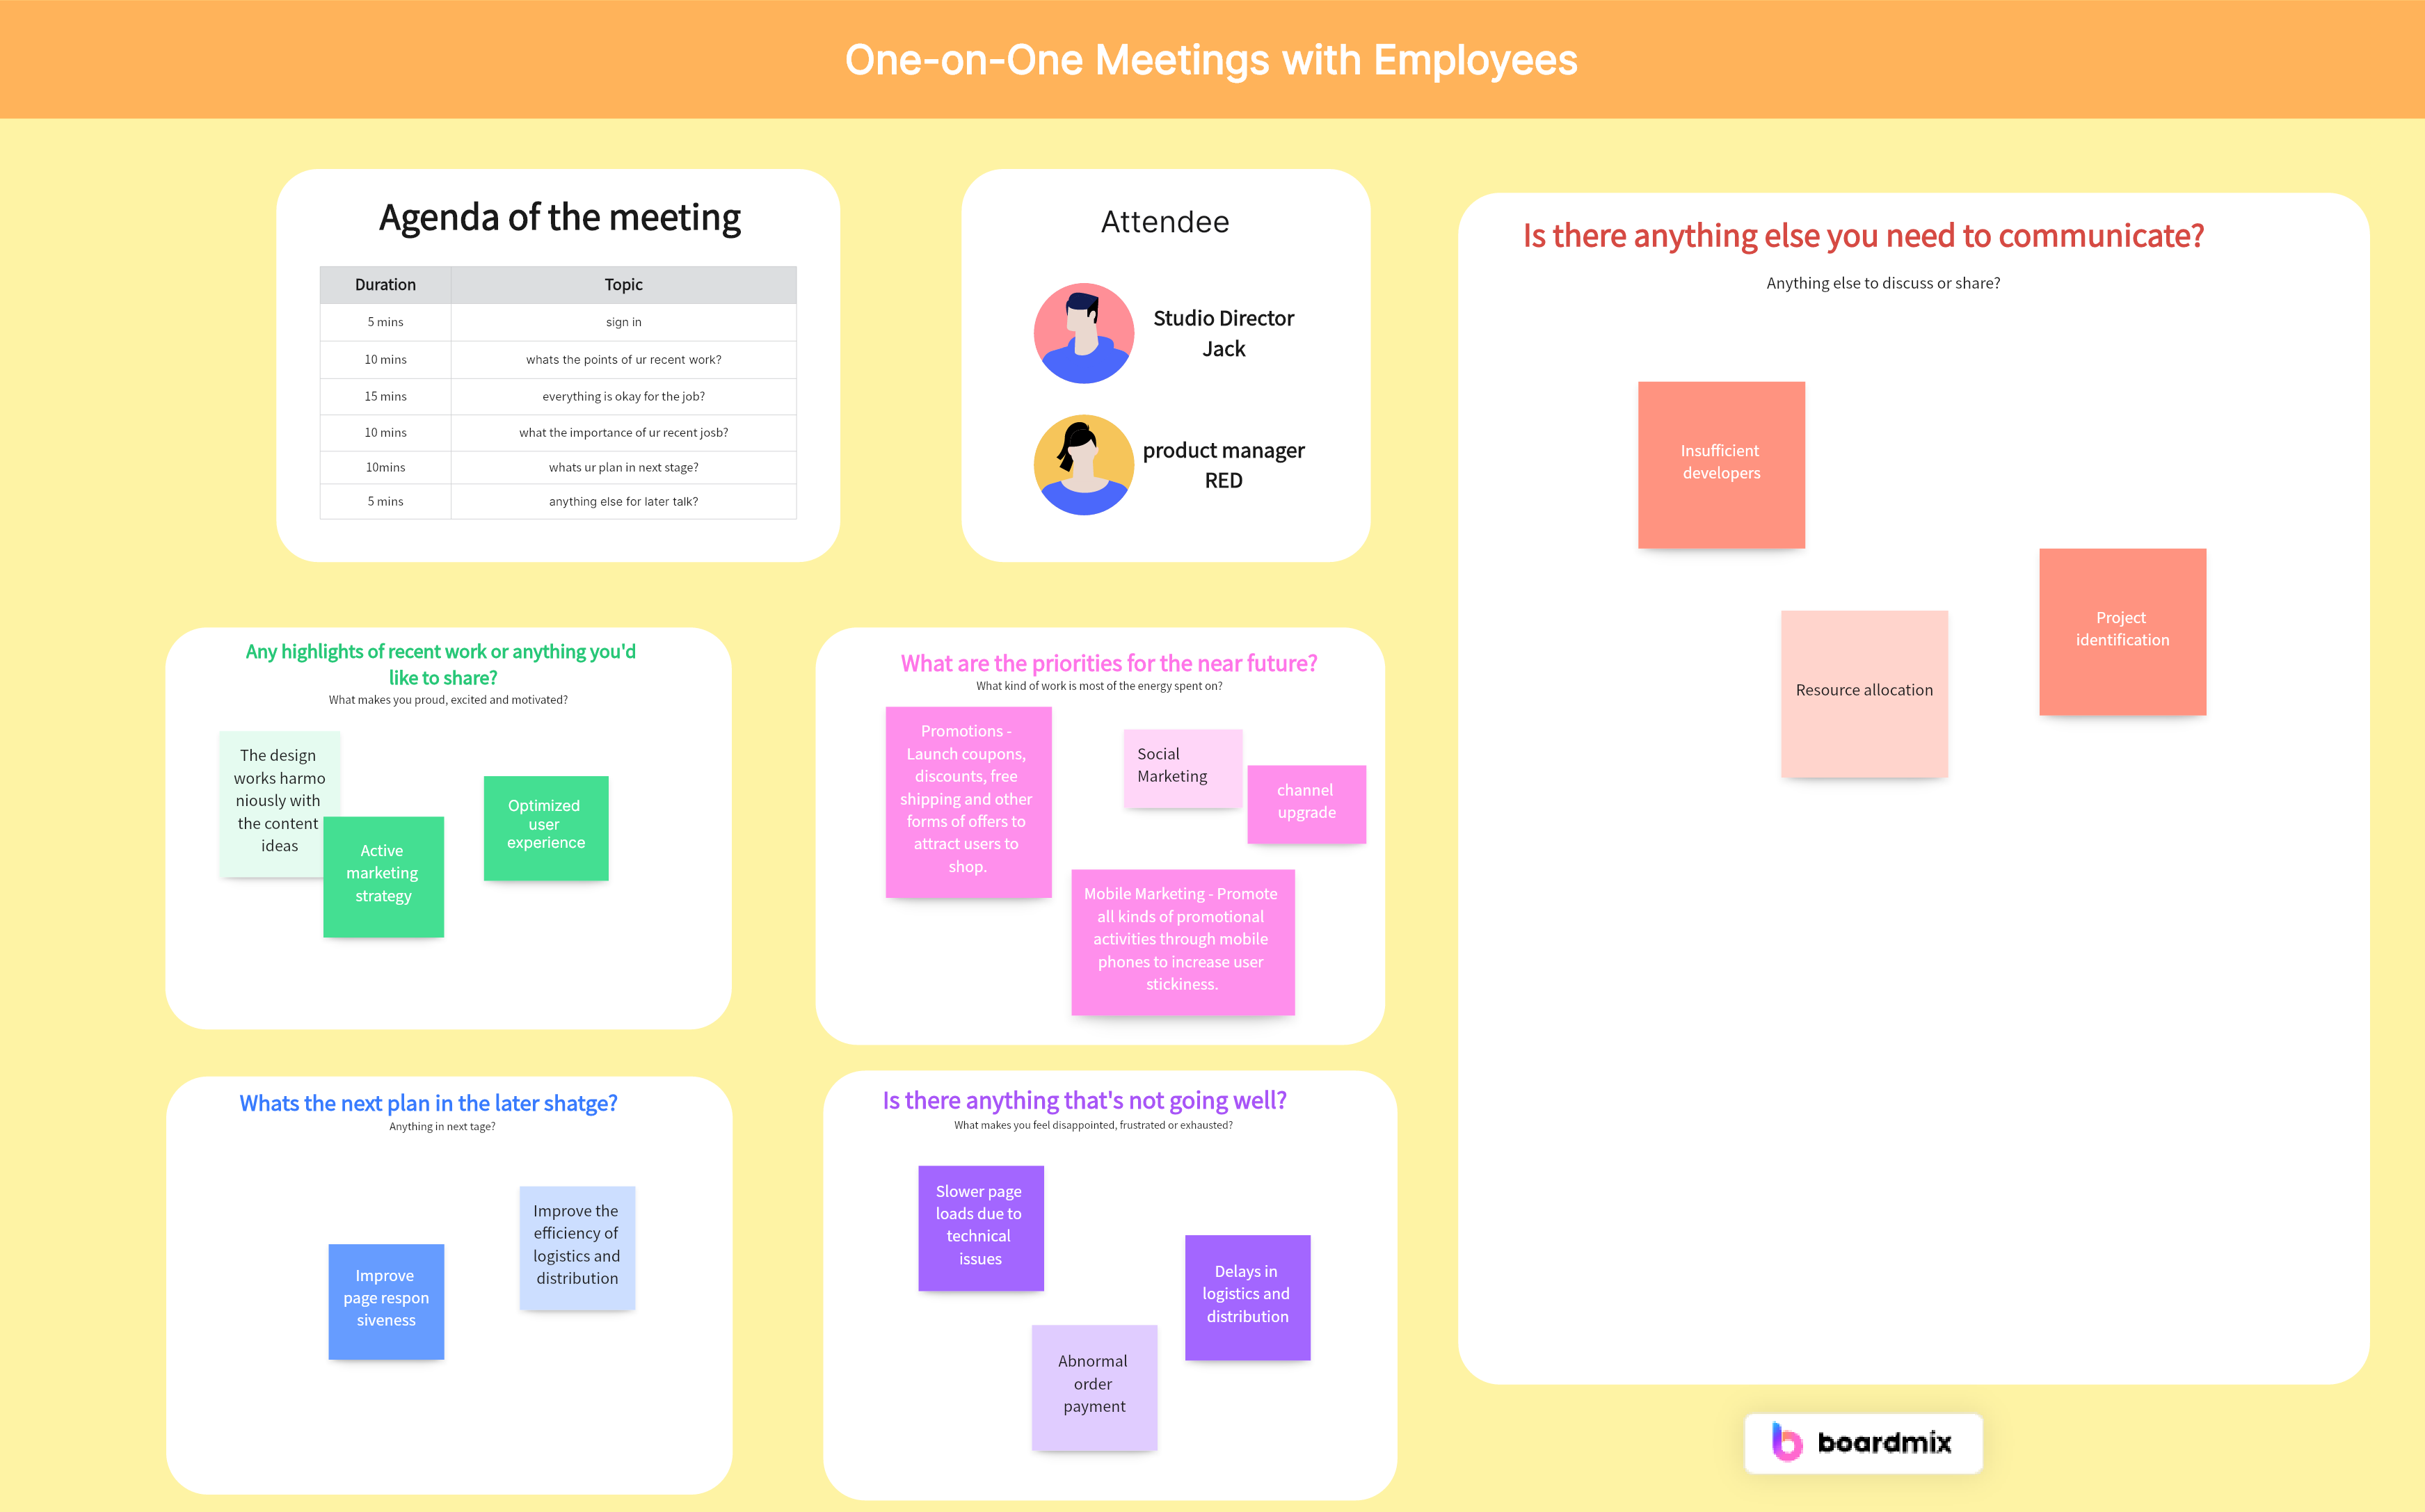 Conduct One-on-One Meetings with Employees: 10 Tips and Questions